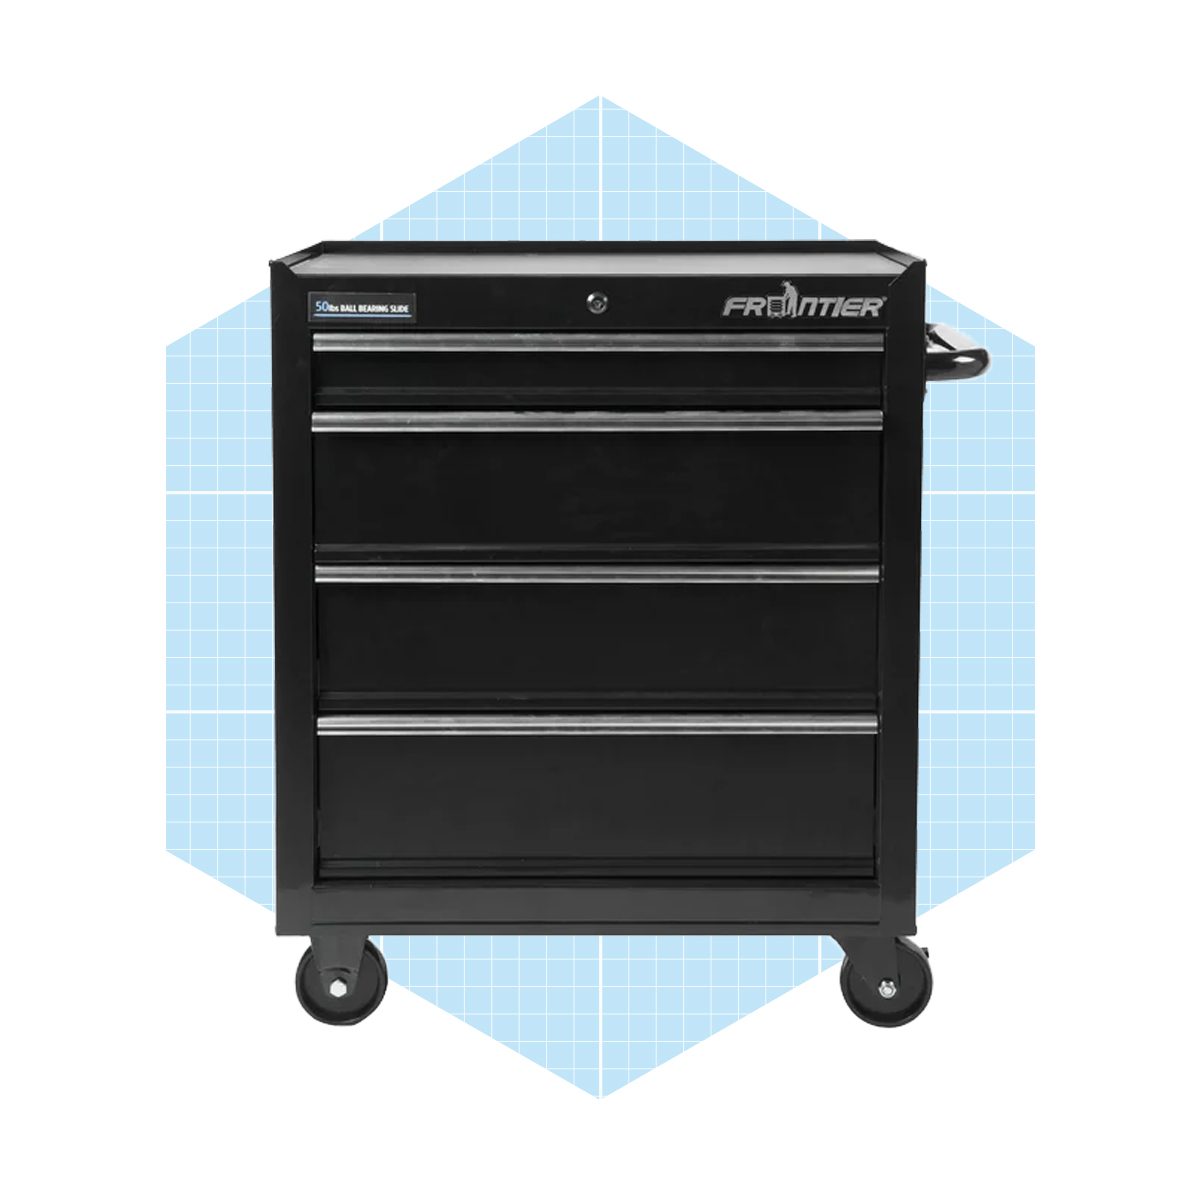 Frontier 26 Inch 4 Drawer Base Cabinet Tool Chest Ecomm Walmart.com